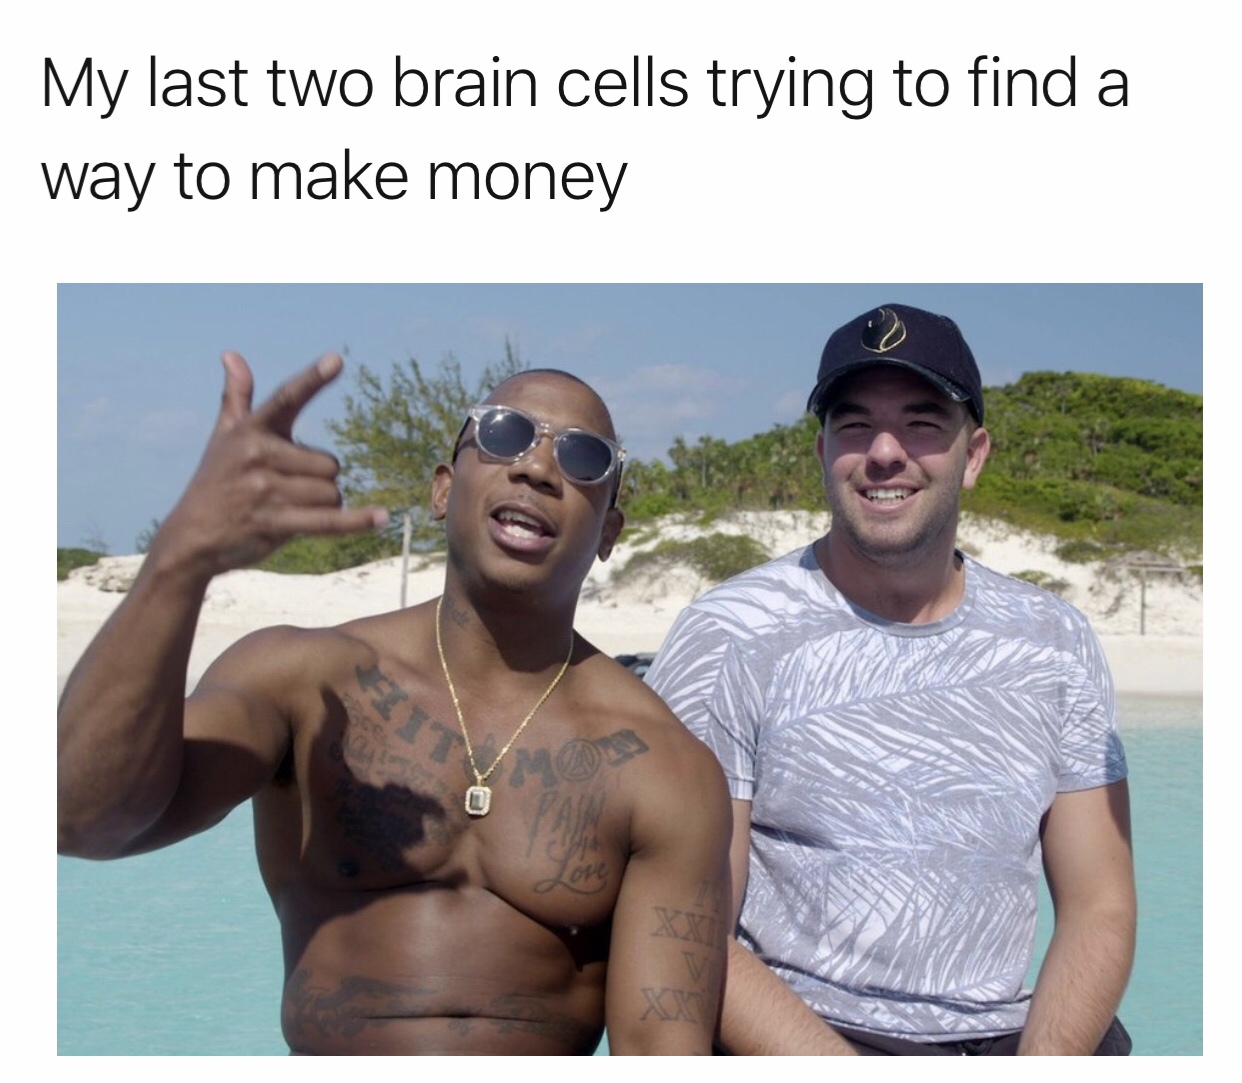 memes - fyre festival meme ja rule - My last two brain cells trying to find a way to make money